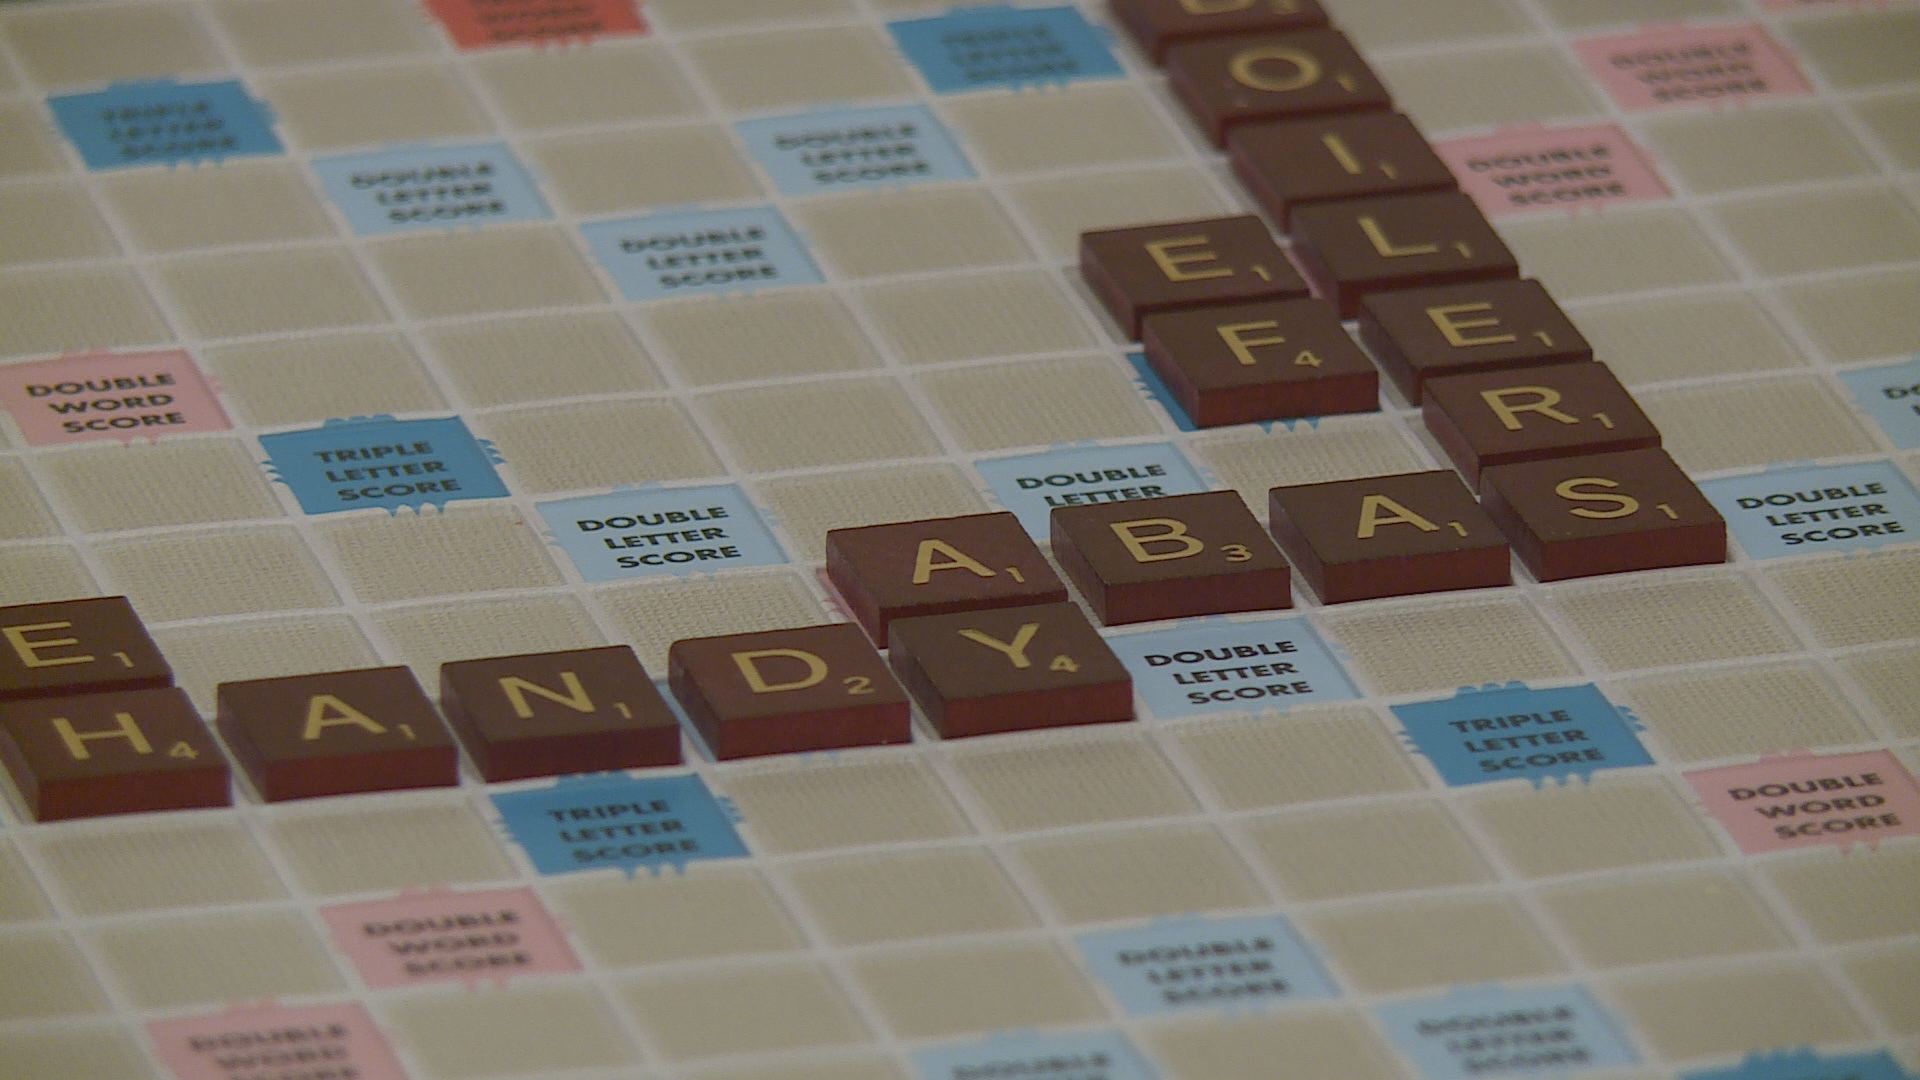 We're absolutely devo: Scrabble adds new words for lolz